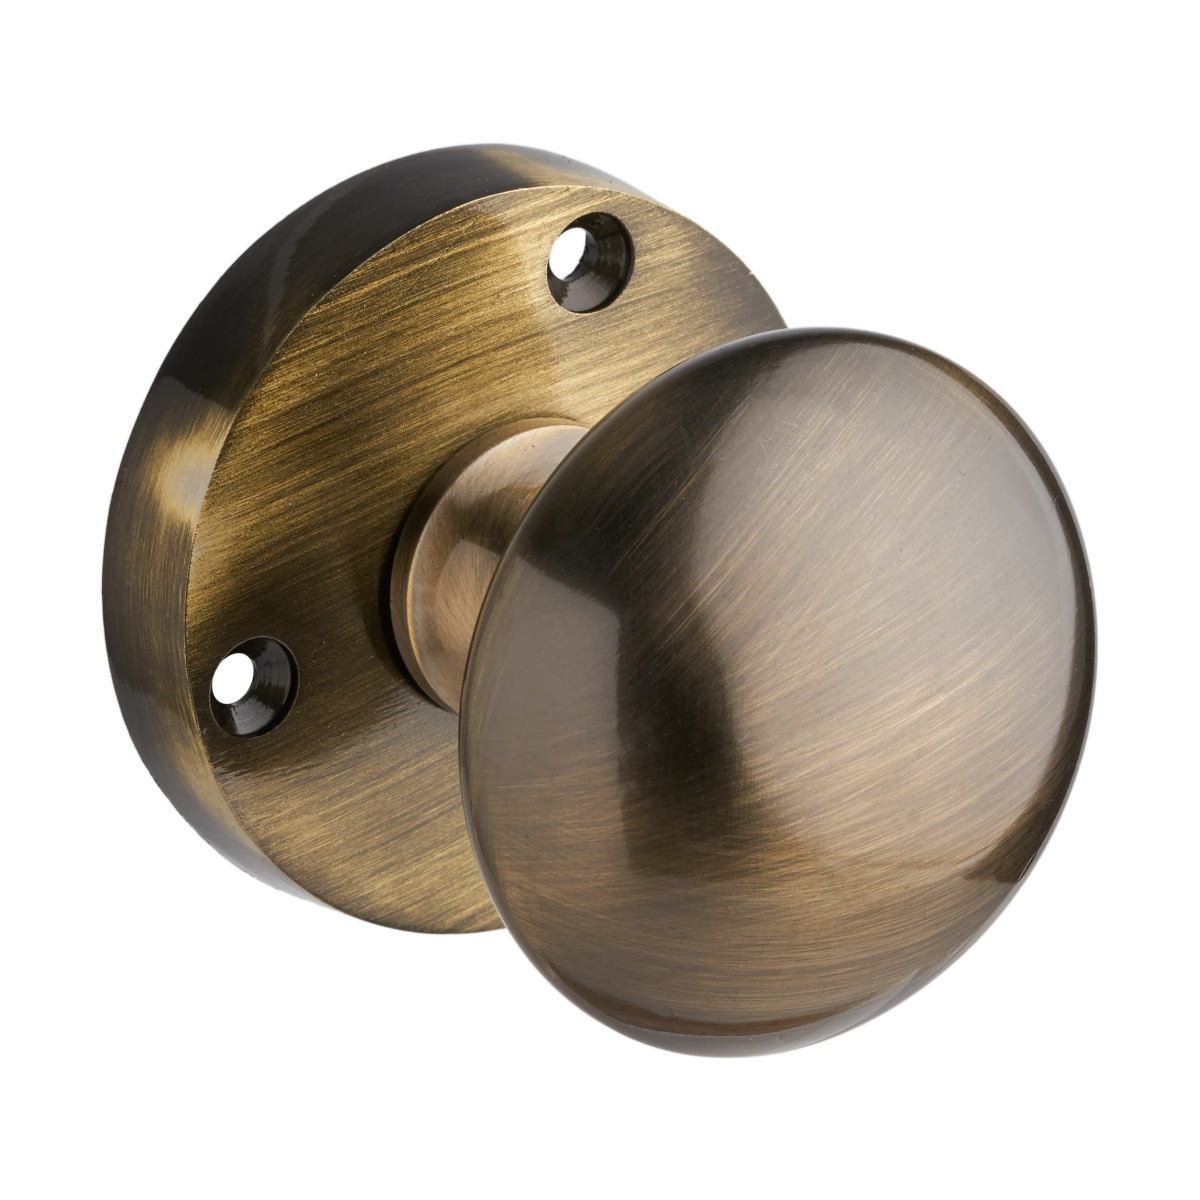 Pair Of Metallic Brown Ceramic Mortice Door Knob With Polished Brass Backplates 